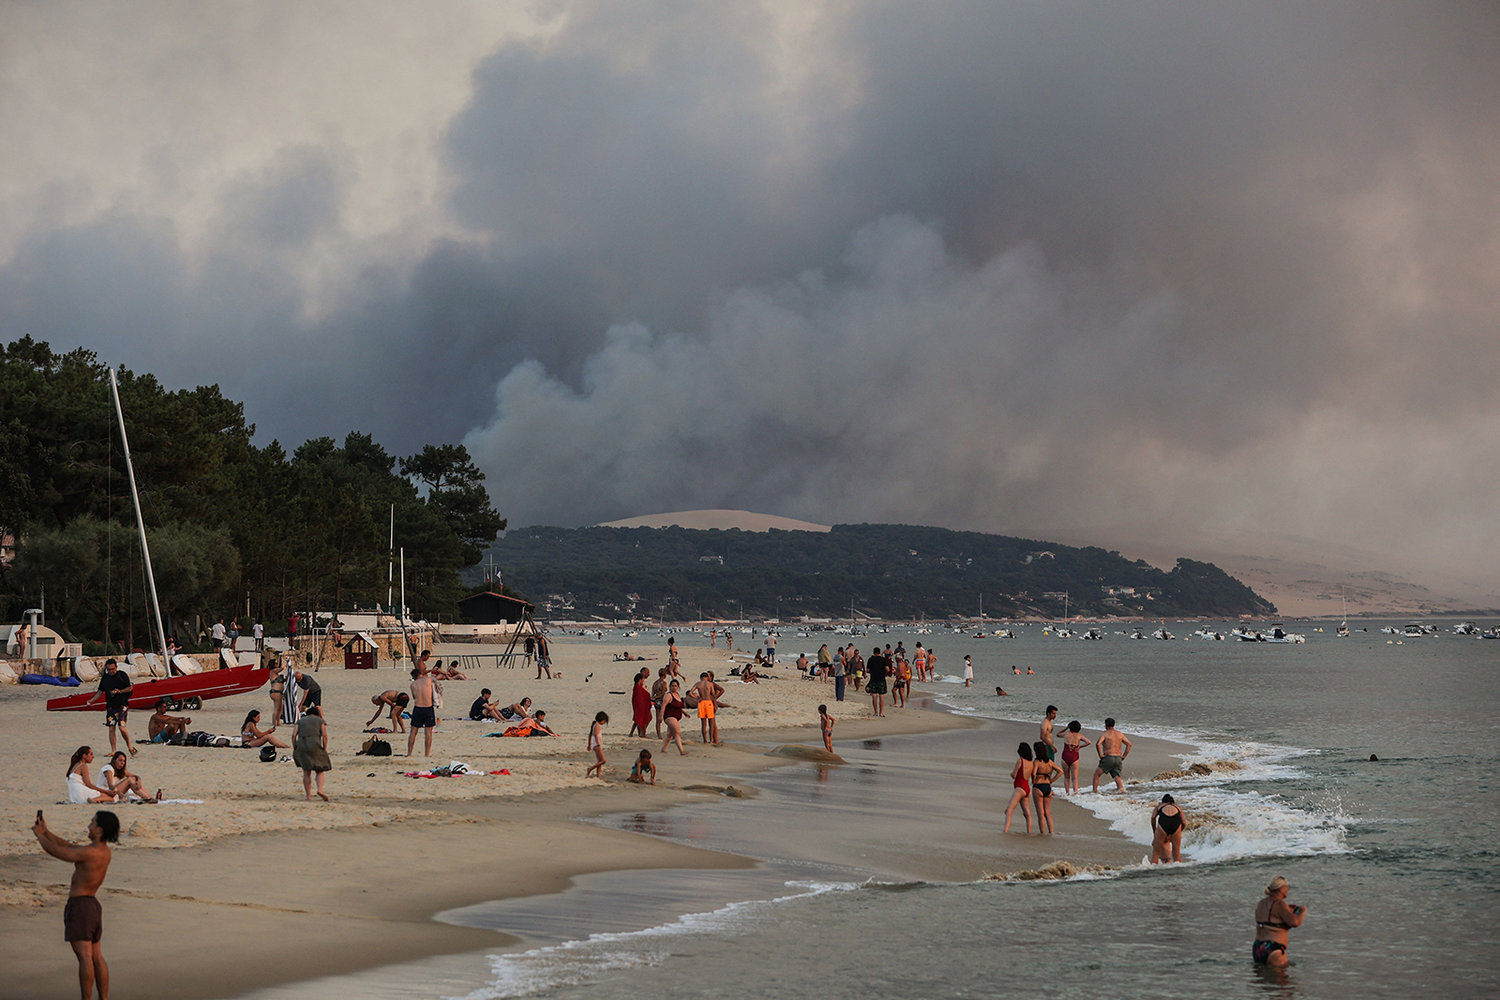 This photograph taken on July 18, 2022, shows people swim on the Moulleau's beach as the smoke rising from the forest fire in La Teste-de-Buch, seen from Arcachon, in front of the Pilat dune. - In scorching heat, with more than 40°C, some 8,000 people had to leave - in a "preventive manner" according to the prefecture - the Miquelots and Pyla-sur-Mer, districts of the municipality of La Teste-de-Buch, a town of 28,000 inhabitants where 4,300 hectares of forest went up in smoke. (Thibaud Moritz/AFP via Getty Images/TNS)